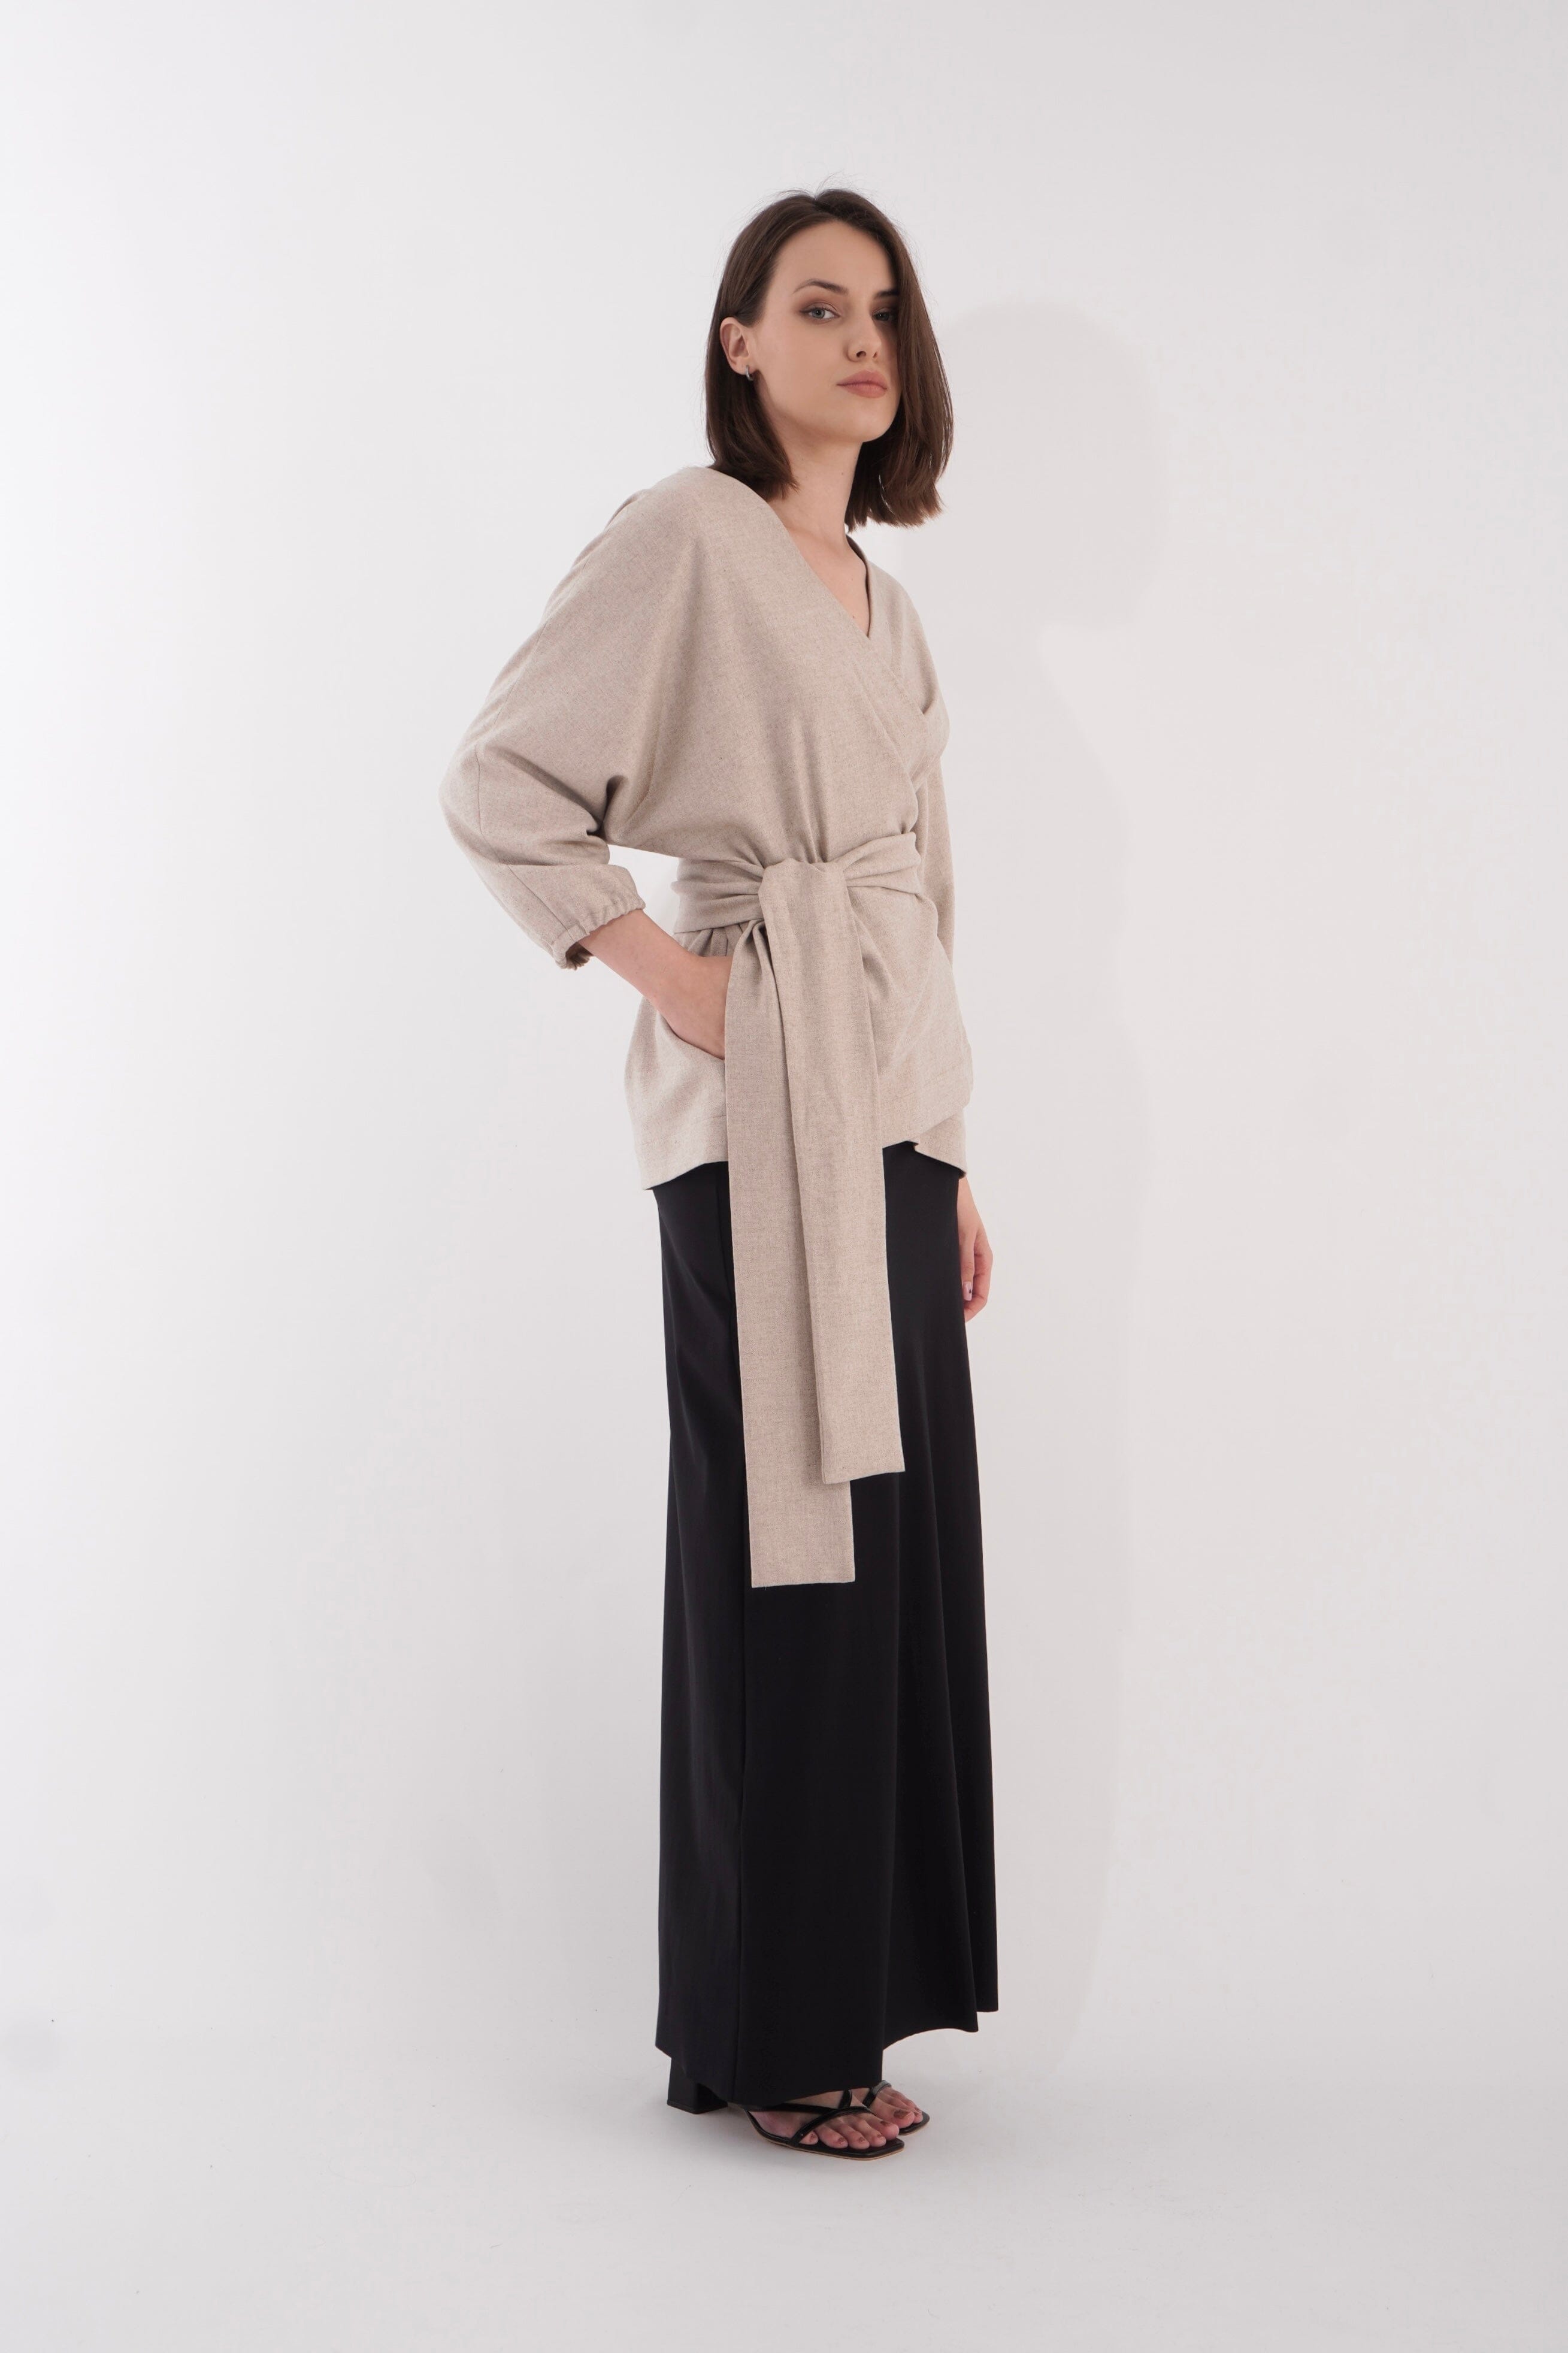  Silent Flame Wool Wrap Jacket Beige Product Amoralle